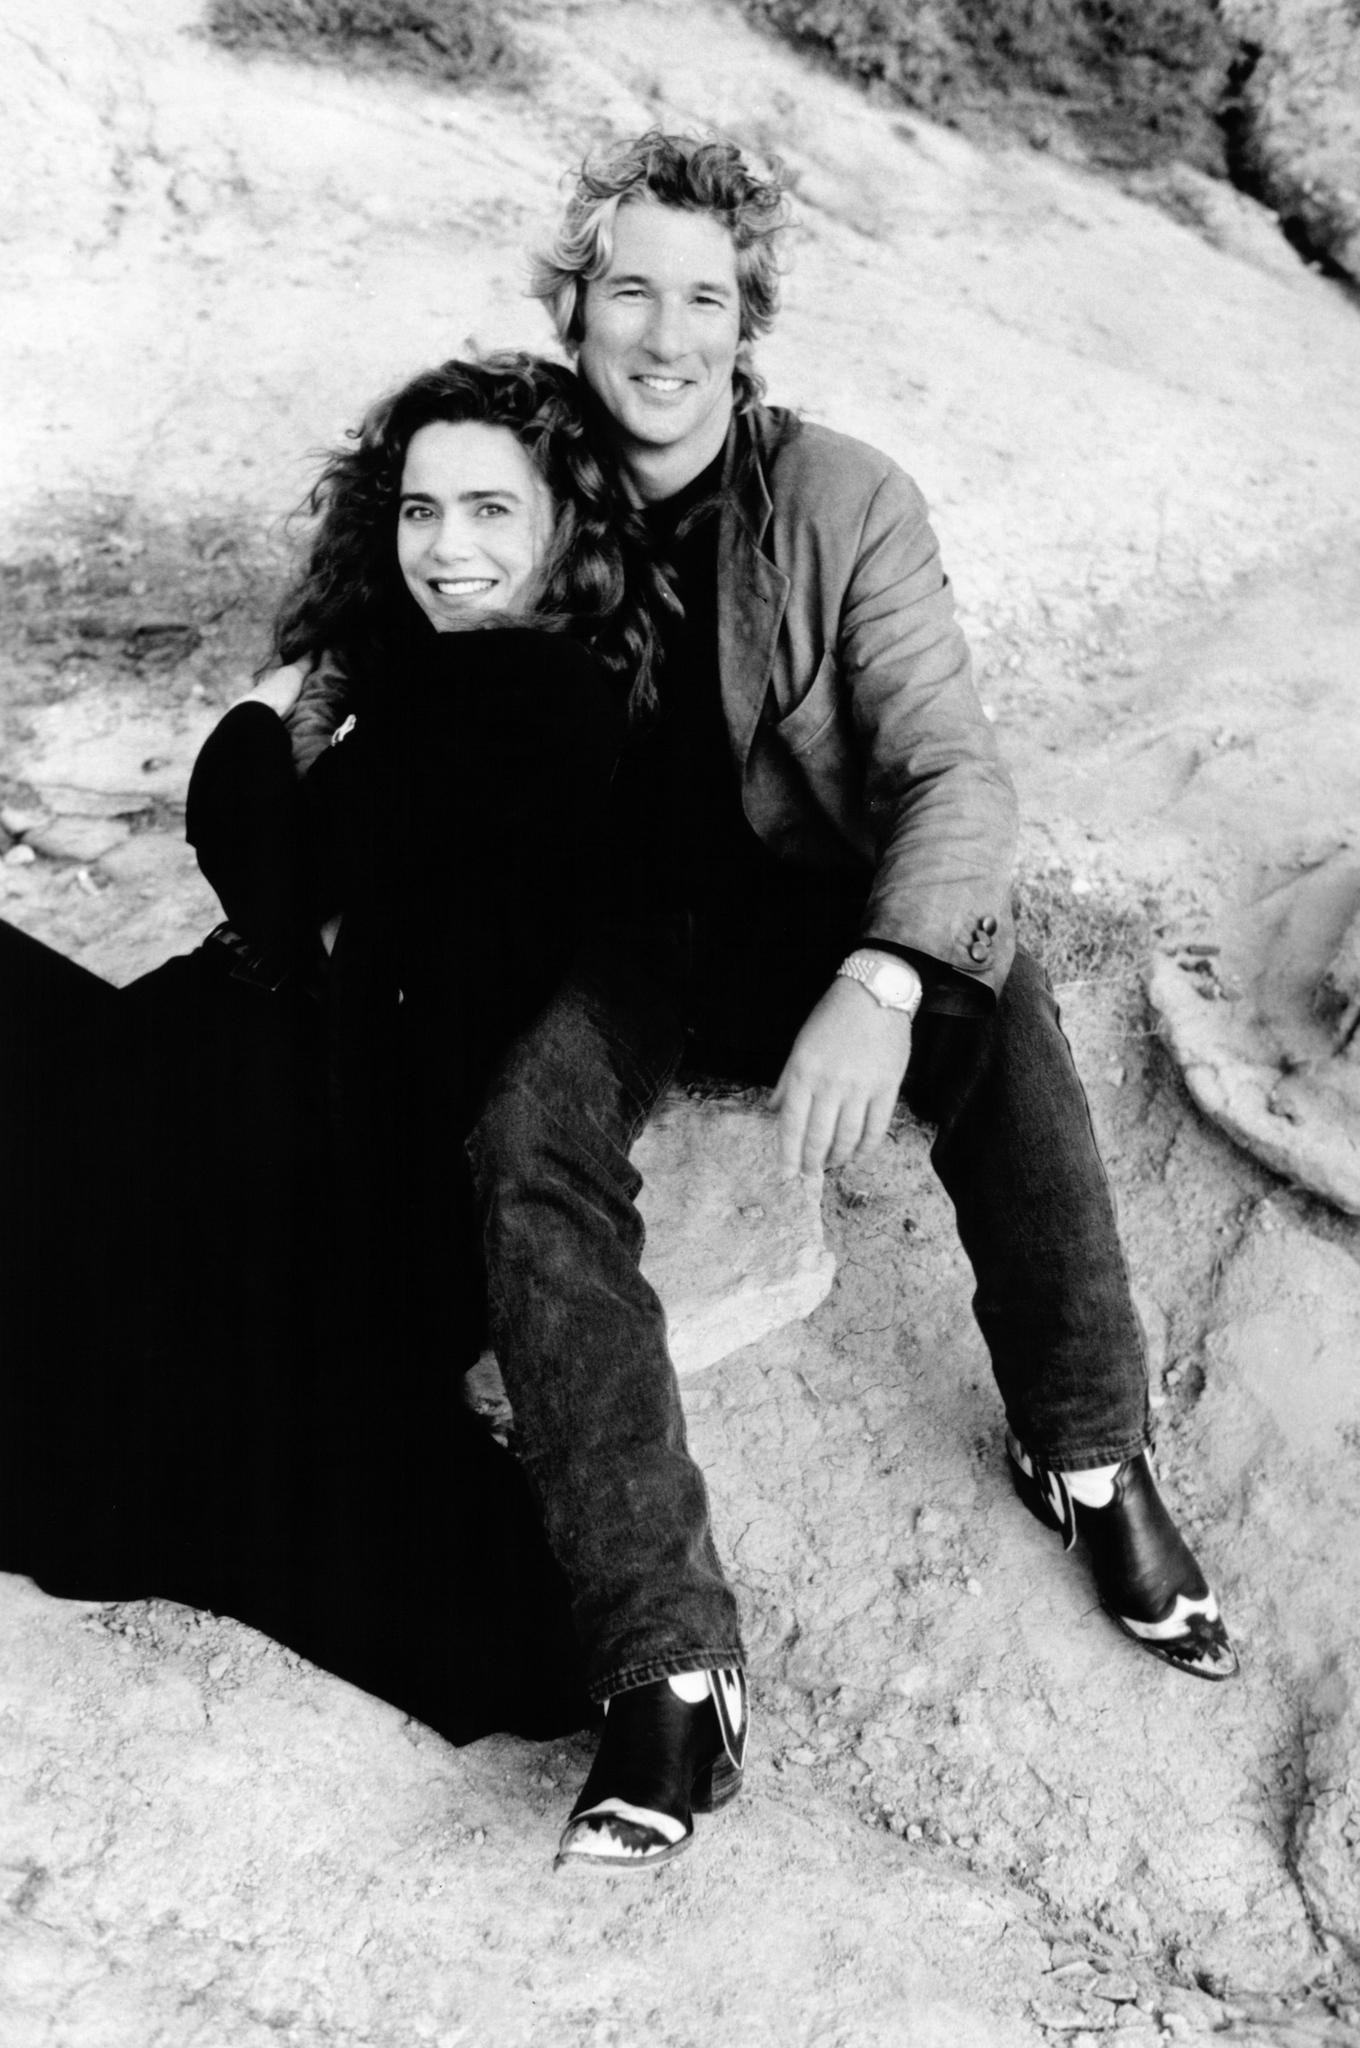 Publicity Photo of Lena Olin and Richard Gere for MR. JONES   1993.  Happy birthday Mr. Gere. 